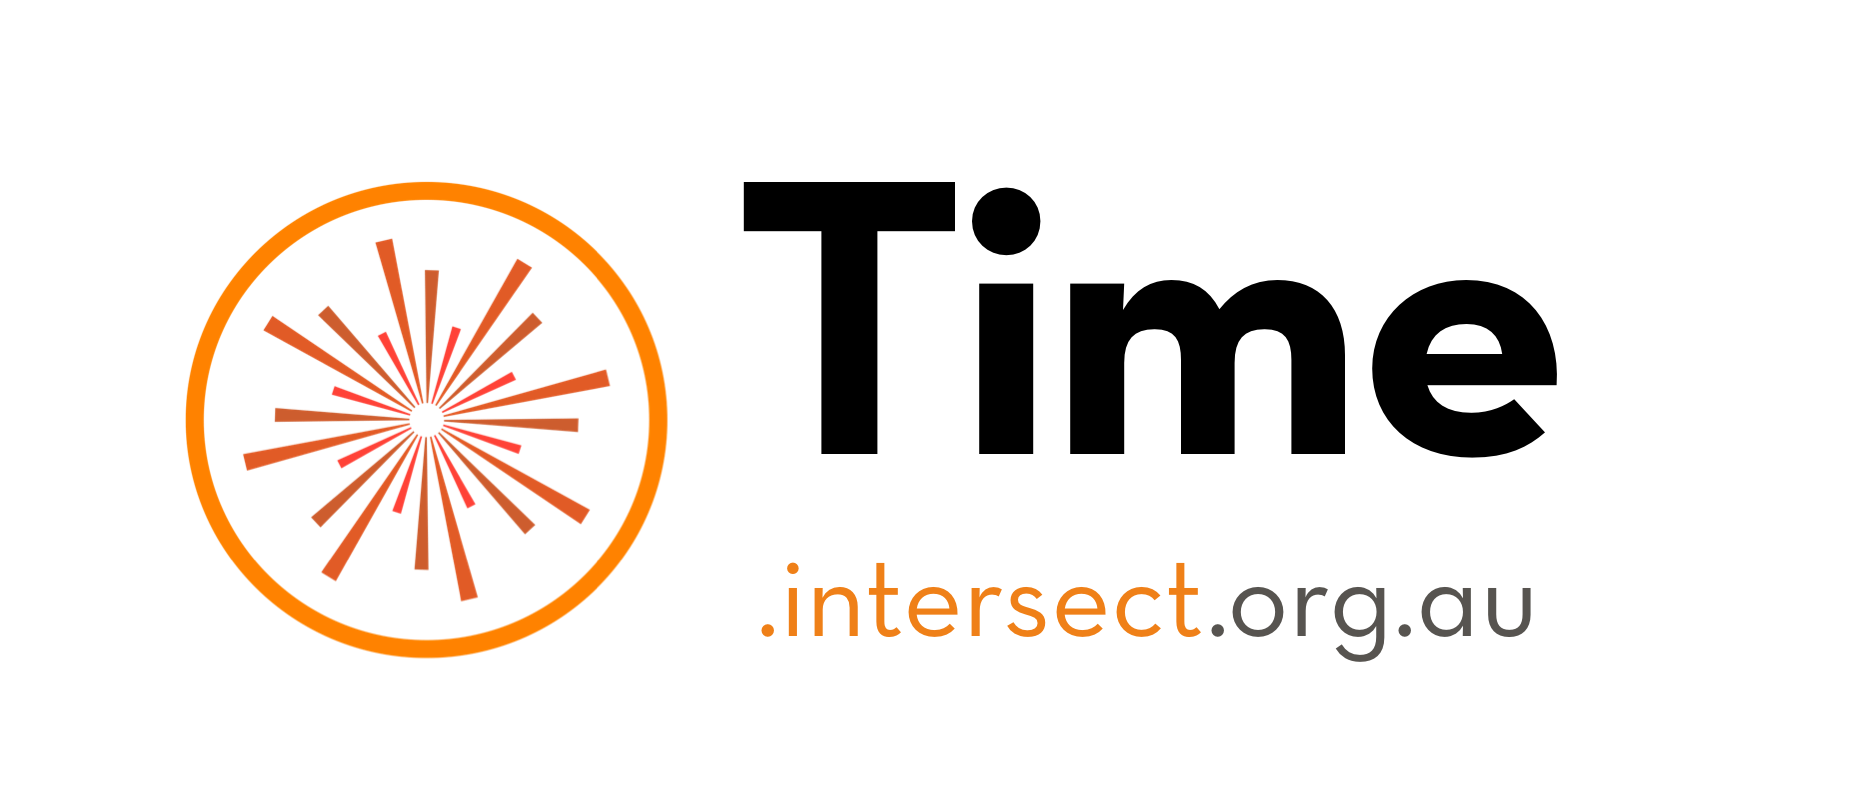 time.intersect.org.au logo